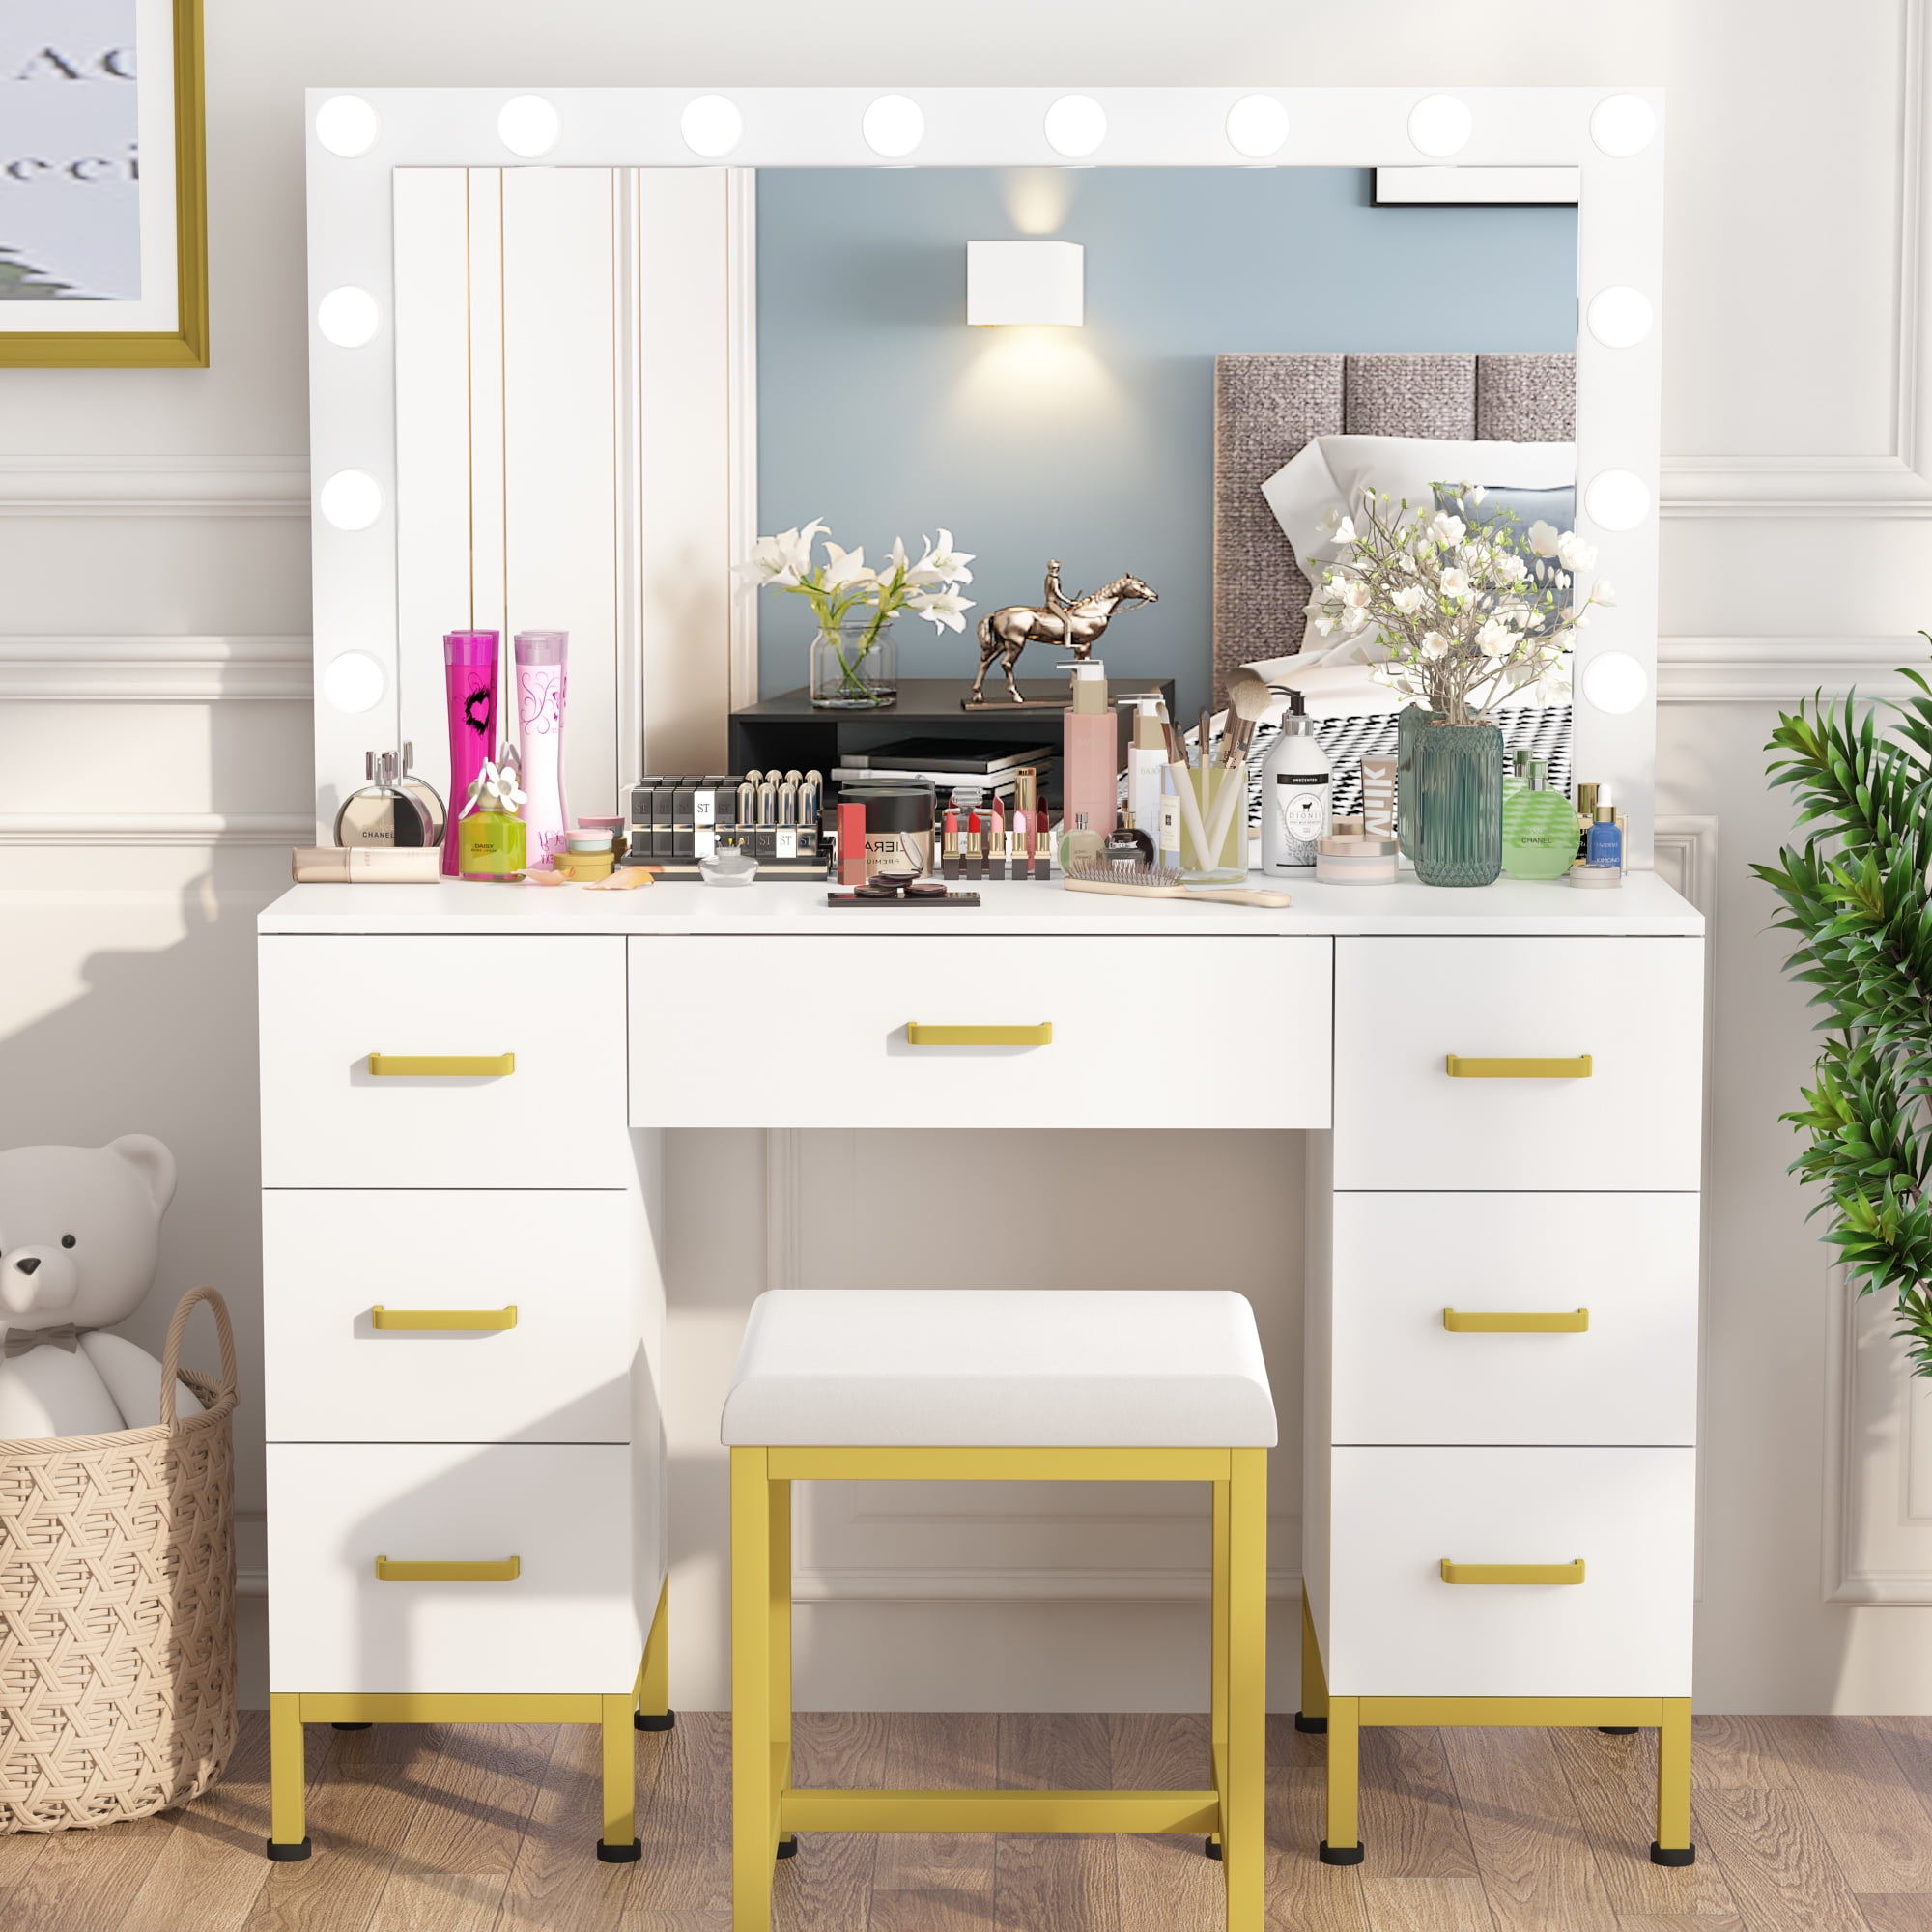 SMOOL Lighted Vanity Mirror Makeup Desk, 7 Drawers, 3 Light Modes, Power  Outlet, Stool - White